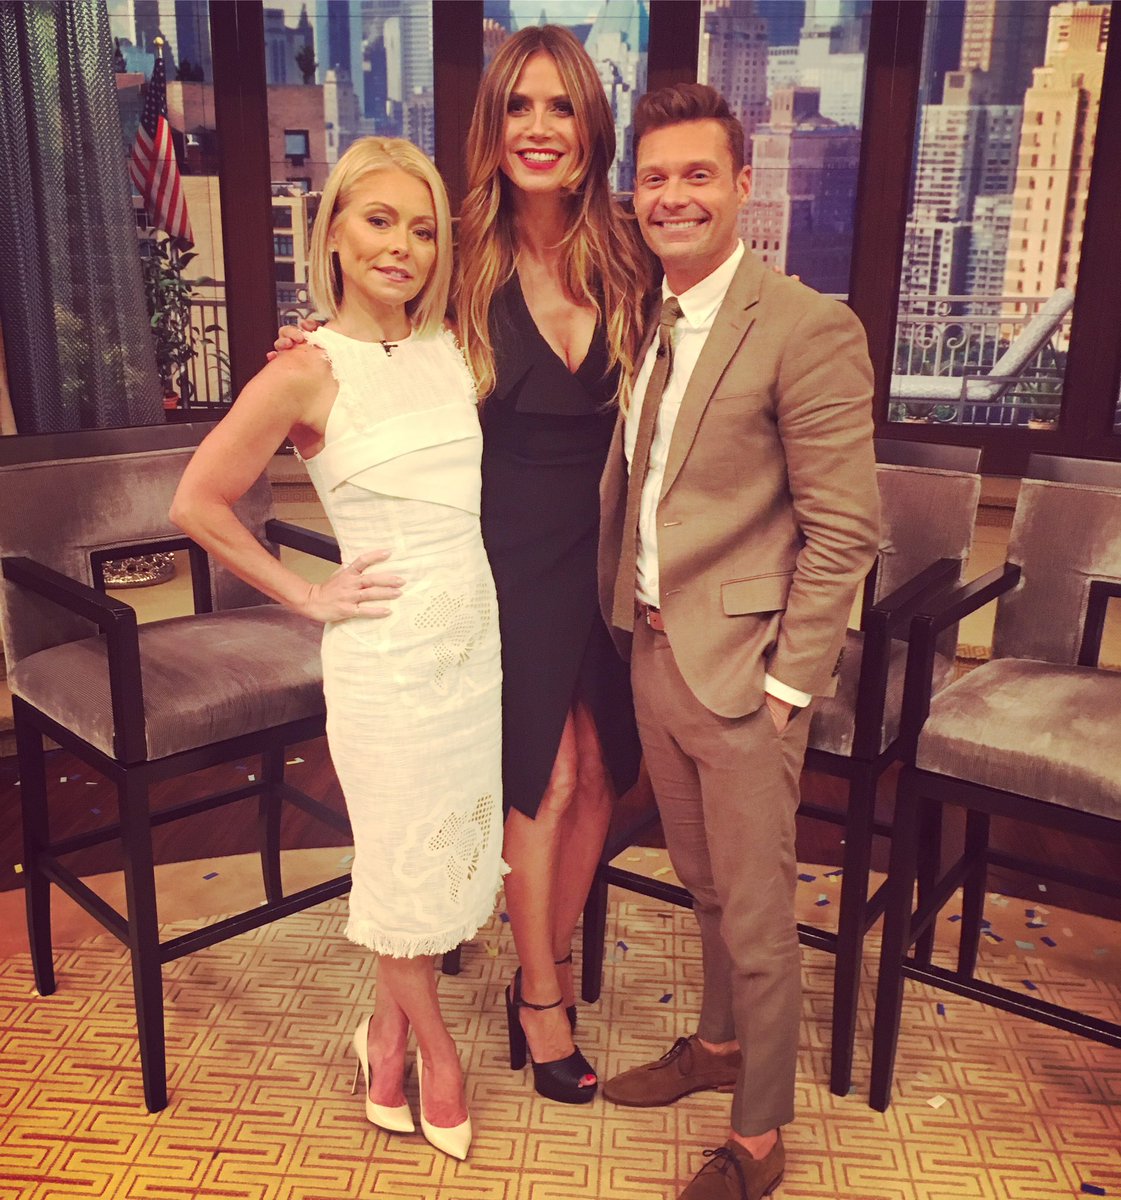 Next stop, @livekellyandryan! So much fun talking @agt and @projectrunway! https://t.co/BaDoWSf973